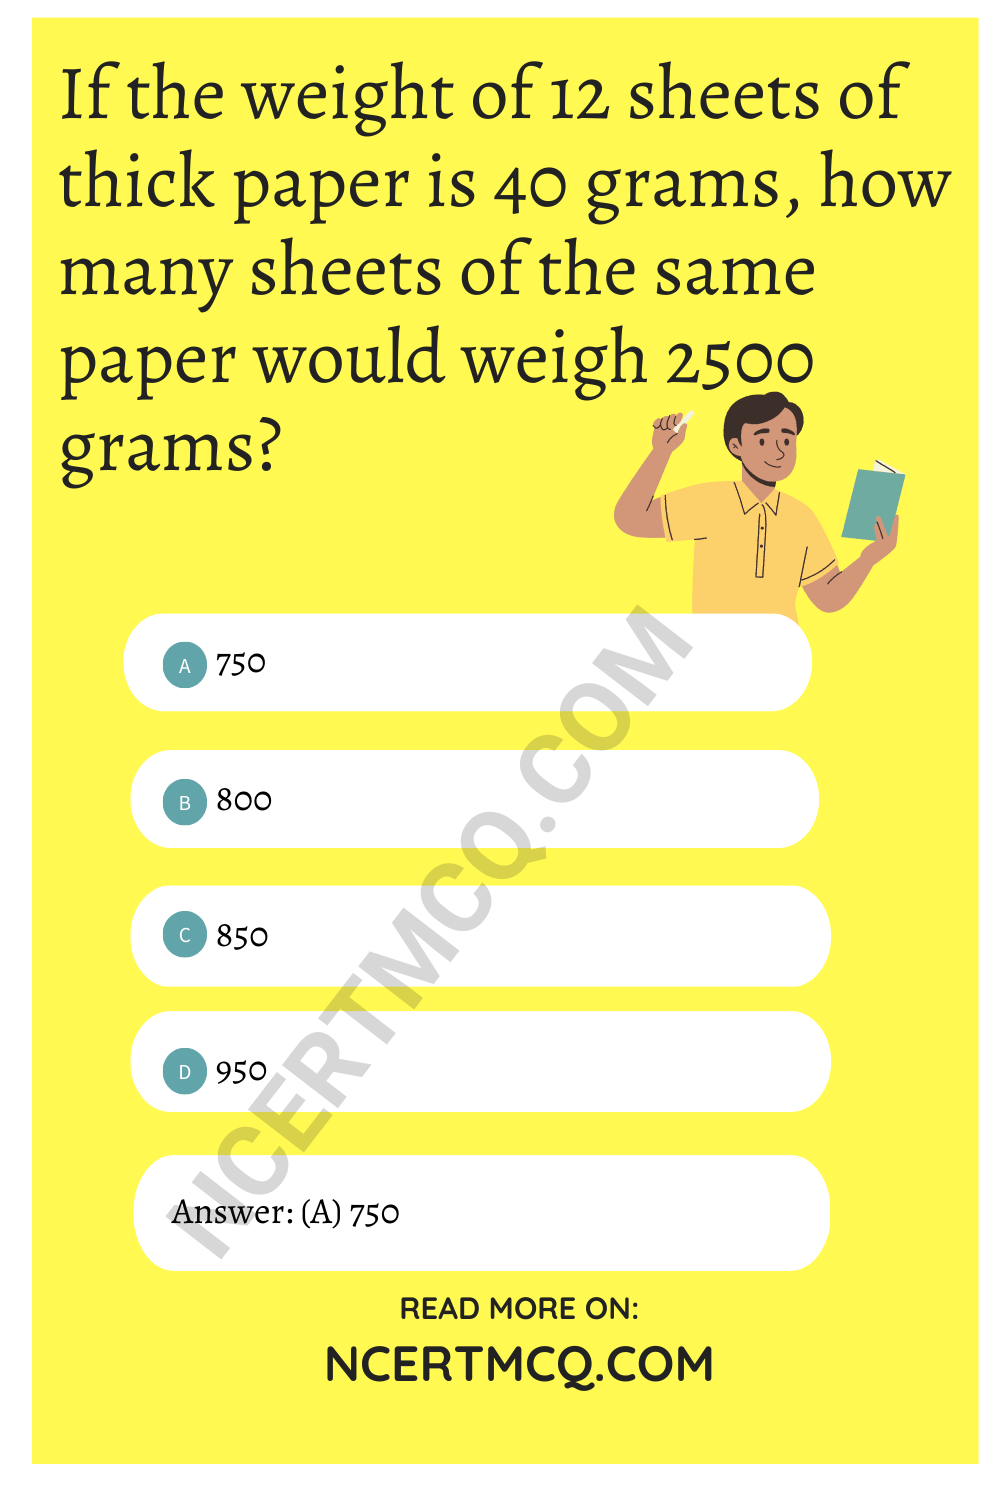 If the weight of 12 sheets of thick paper is 40 grams, how many sheets of the same paper would weigh 2500 grams?